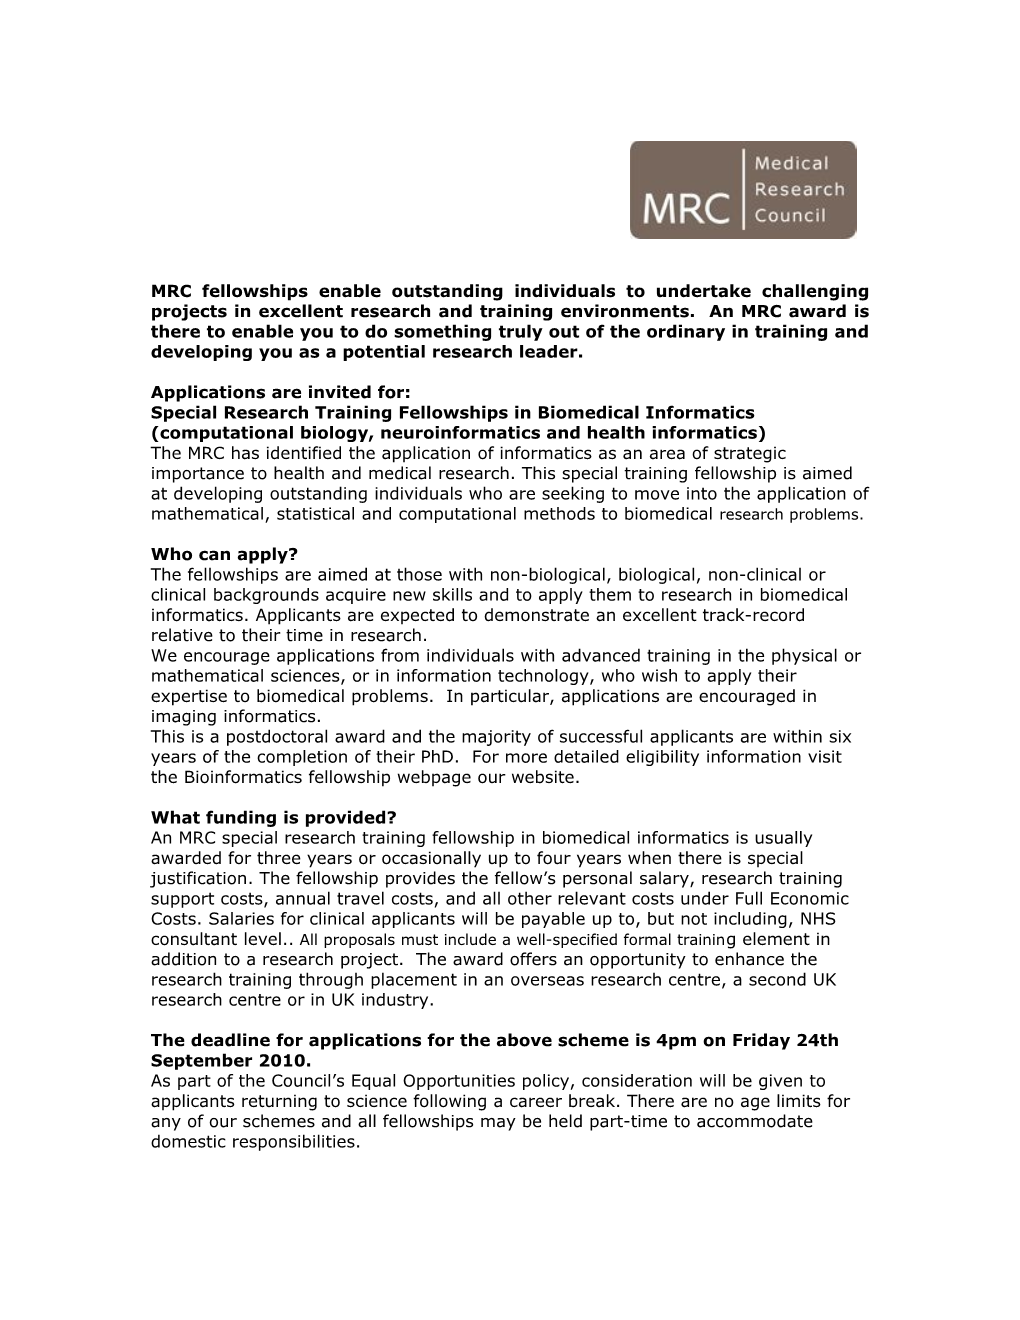 The MRC Provides Support Through a Broad Portfolio of Personal Award Schemes for Talented